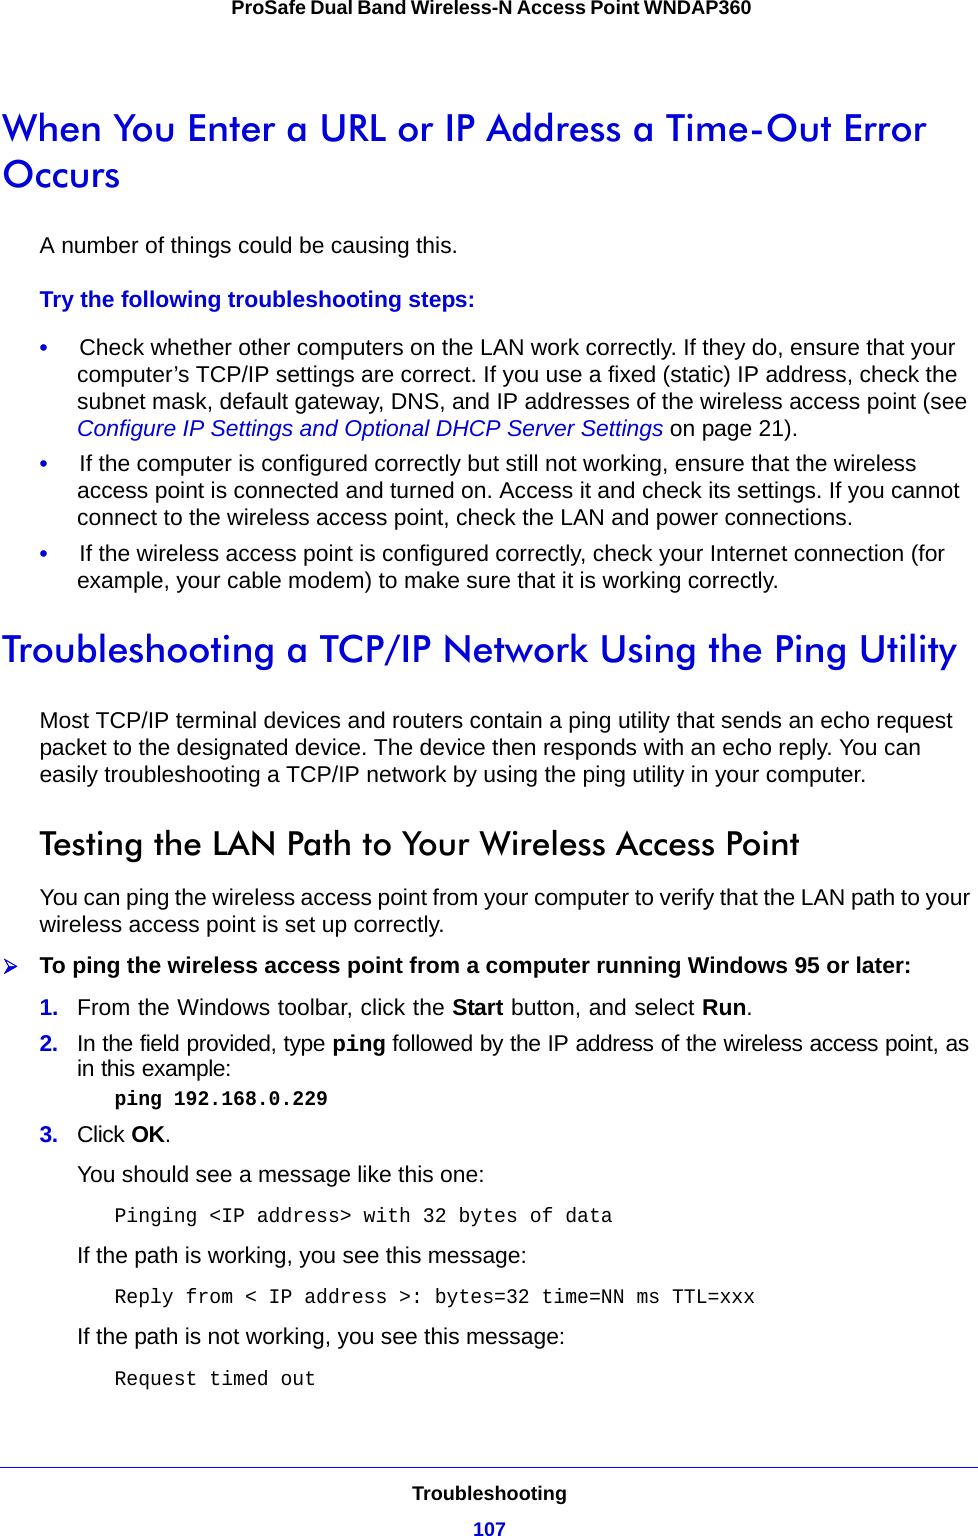 Troubleshooting107 ProSafe Dual Band Wireless-N Access Point WNDAP360When You Enter a URL or IP Address a Time-Out Error OccursA number of things could be causing this.Try the following troubleshooting steps:•     Check whether other computers on the LAN work correctly. If they do, ensure that your computer’s TCP/IP settings are correct. If you use a fixed (static) IP address, check the subnet mask, default gateway, DNS, and IP addresses of the wireless access point (see Configure IP Settings and Optional DHCP Server Settings on page 21).•     If the computer is configured correctly but still not working, ensure that the wireless access point is connected and turned on. Access it and check its settings. If you cannot connect to the wireless access point, check the LAN and power connections.•     If the wireless access point is configured correctly, check your Internet connection (for example, your cable modem) to make sure that it is working correctly.Troubleshooting a TCP/IP Network Using the Ping UtilityMost TCP/IP terminal devices and routers contain a ping utility that sends an echo request packet to the designated device. The device then responds with an echo reply. You can easily troubleshooting a TCP/IP network by using the ping utility in your computer.Testing the LAN Path to Your Wireless Access PointYou can ping the wireless access point from your computer to verify that the LAN path to your wireless access point is set up correctly.To ping the wireless access point from a computer running Windows 95 or later:1.  From the Windows toolbar, click the Start button, and select Run.2.  In the field provided, type ping followed by the IP address of the wireless access point, as in this example: ping 192.168.0.2293.  Click OK.You should see a message like this one:Pinging &lt;IP address&gt; with 32 bytes of dataIf the path is working, you see this message:Reply from &lt; IP address &gt;: bytes=32 time=NN ms TTL=xxxIf the path is not working, you see this message:Request timed out